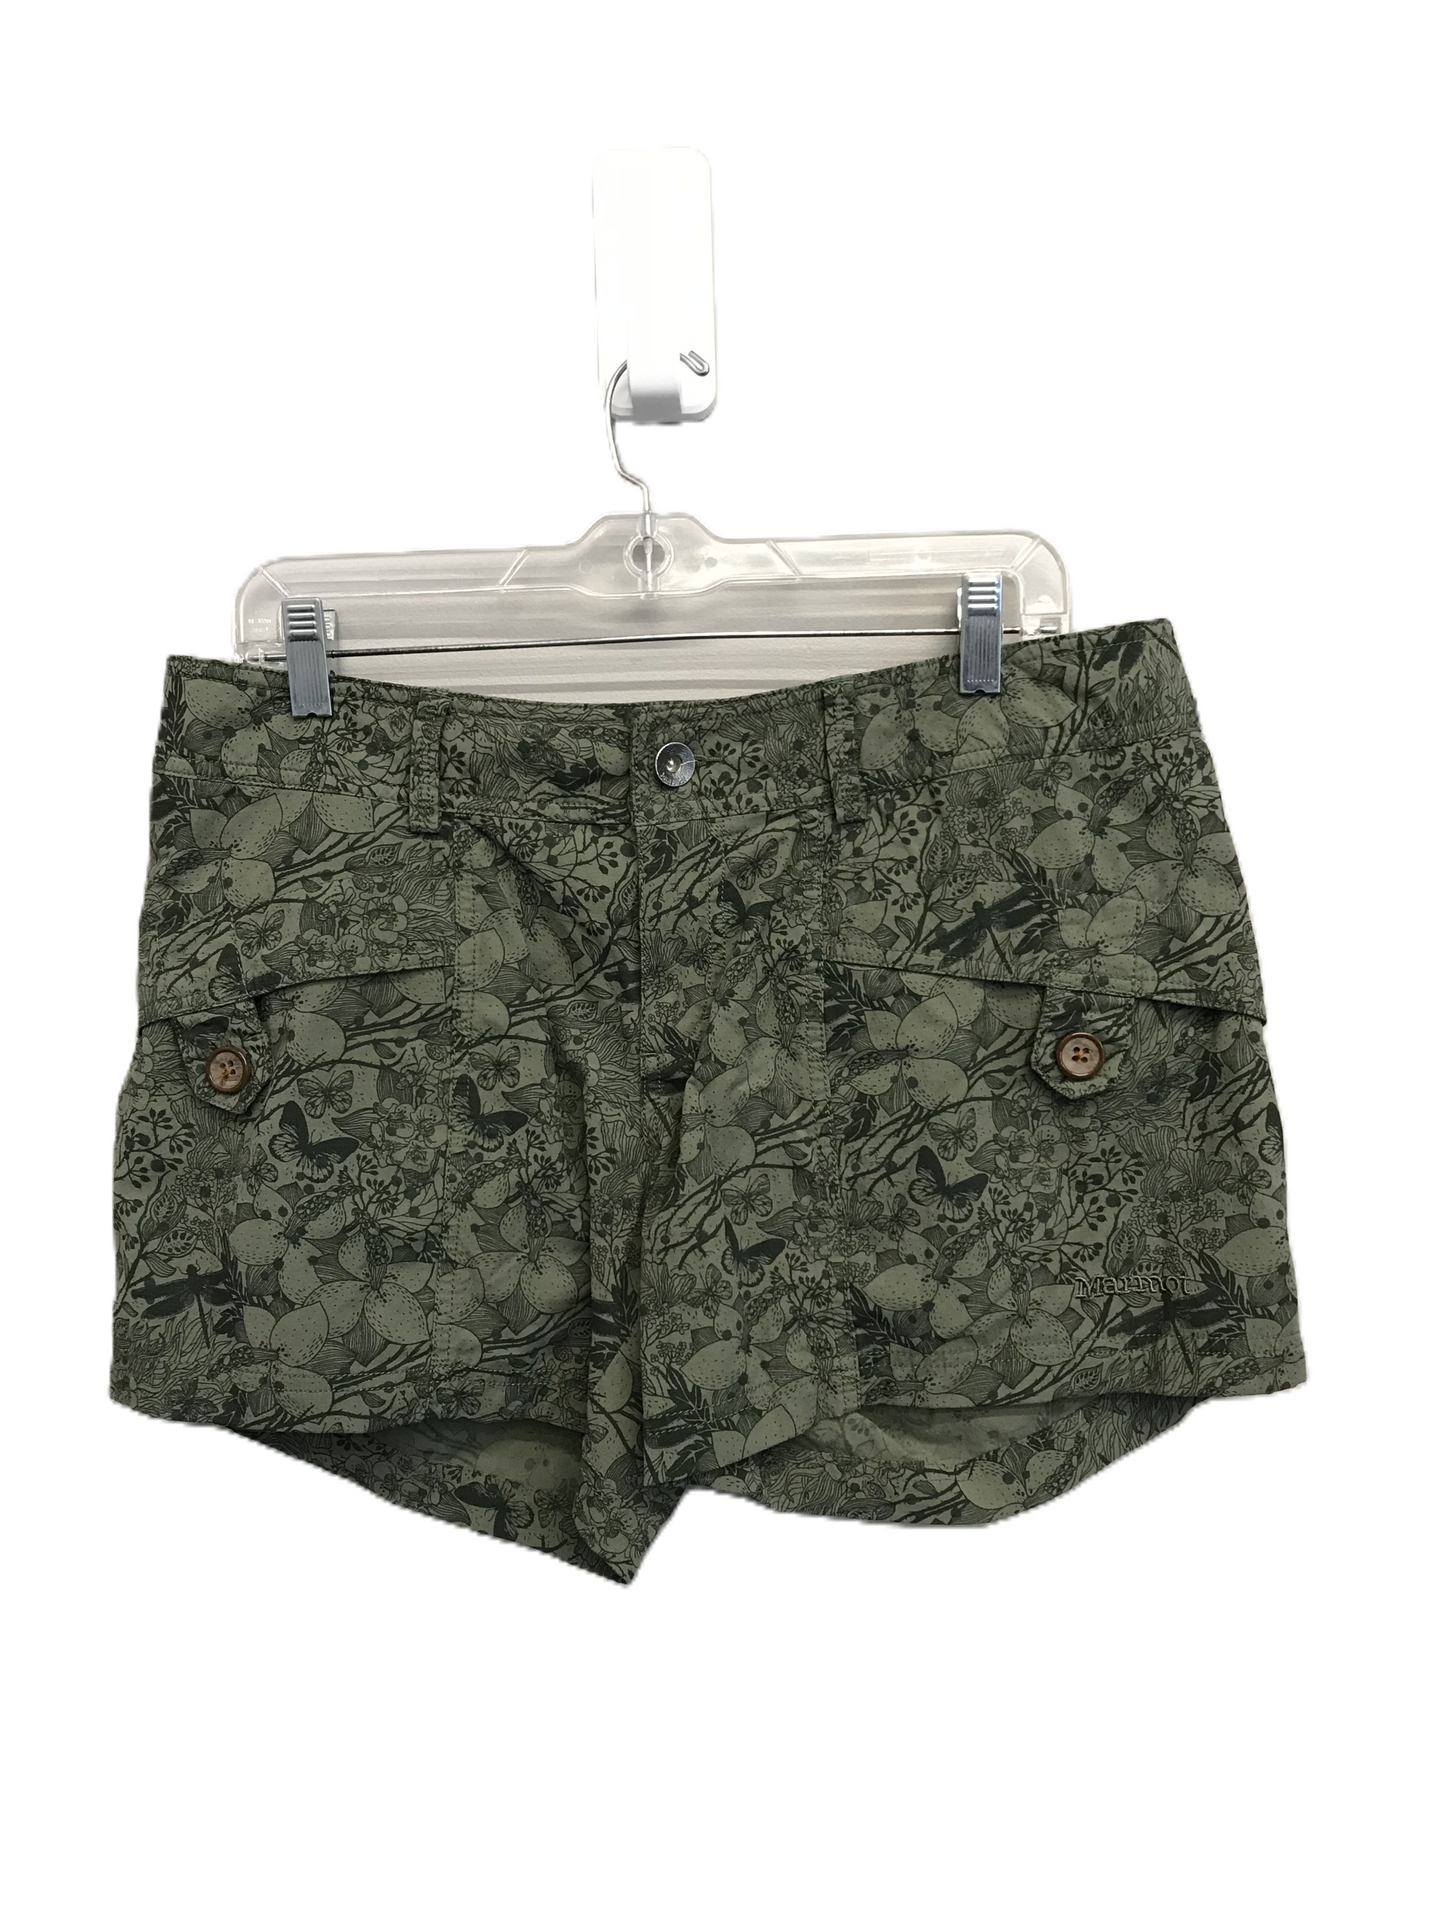 Green Shorts By Marmot, Size: 12